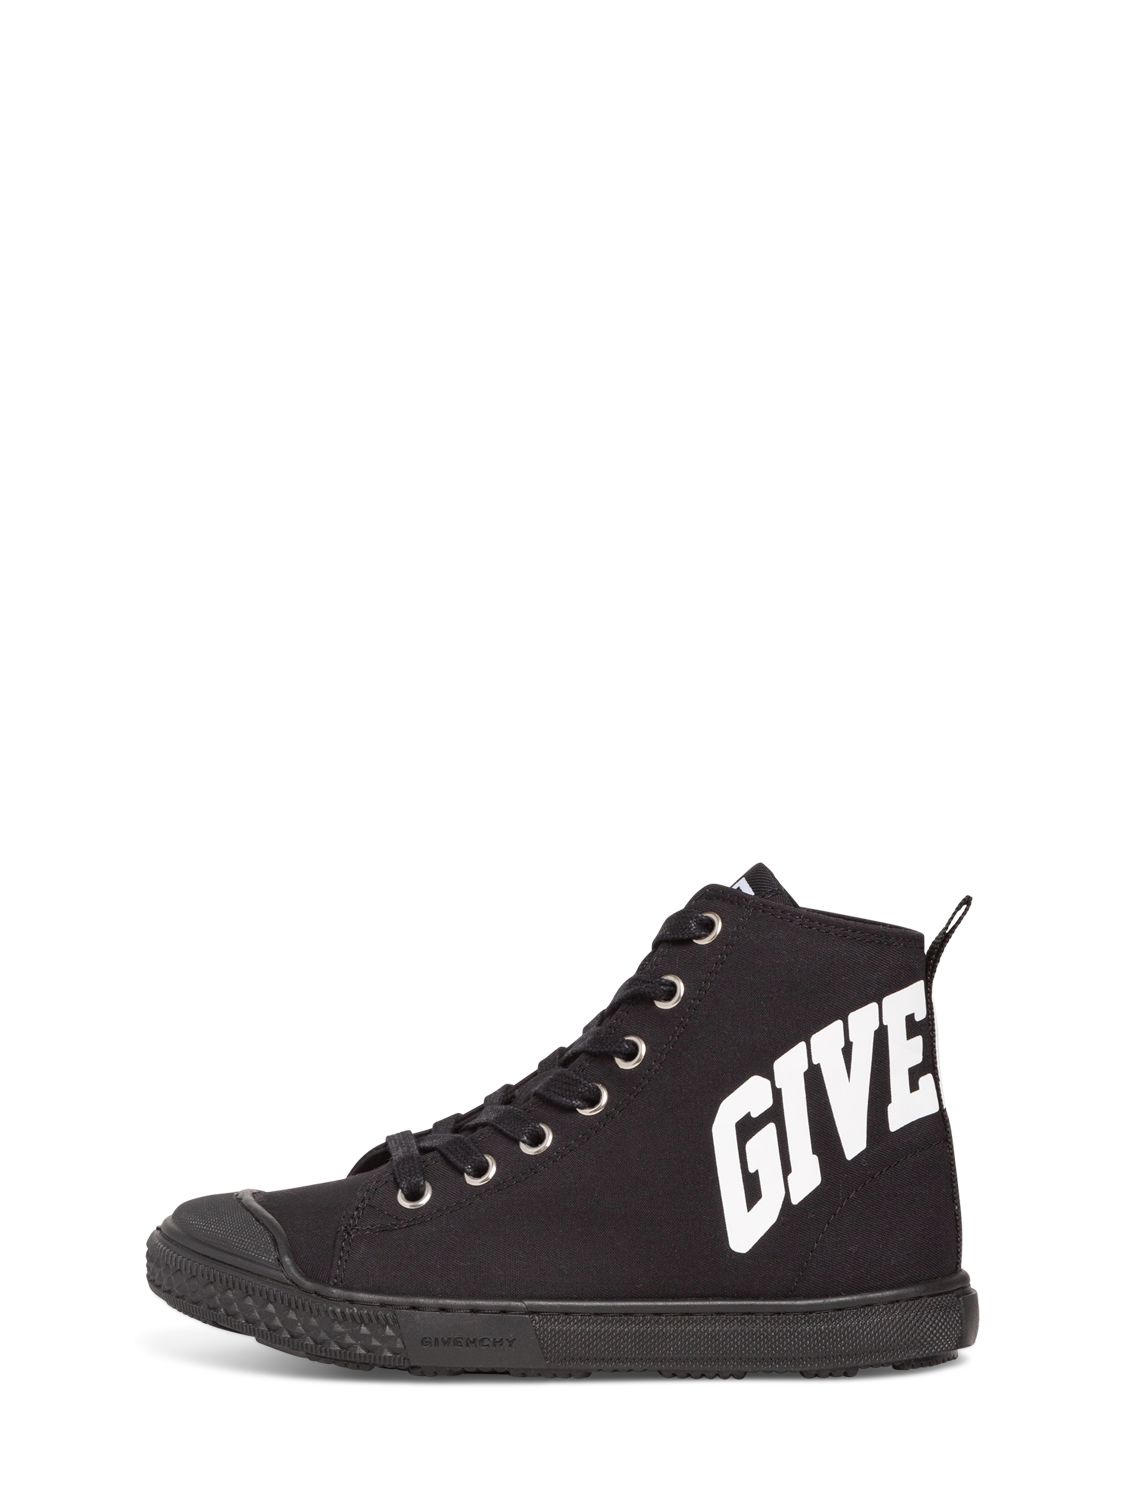 Givenchy Logo Print Canvas High Top Sneakers In Black